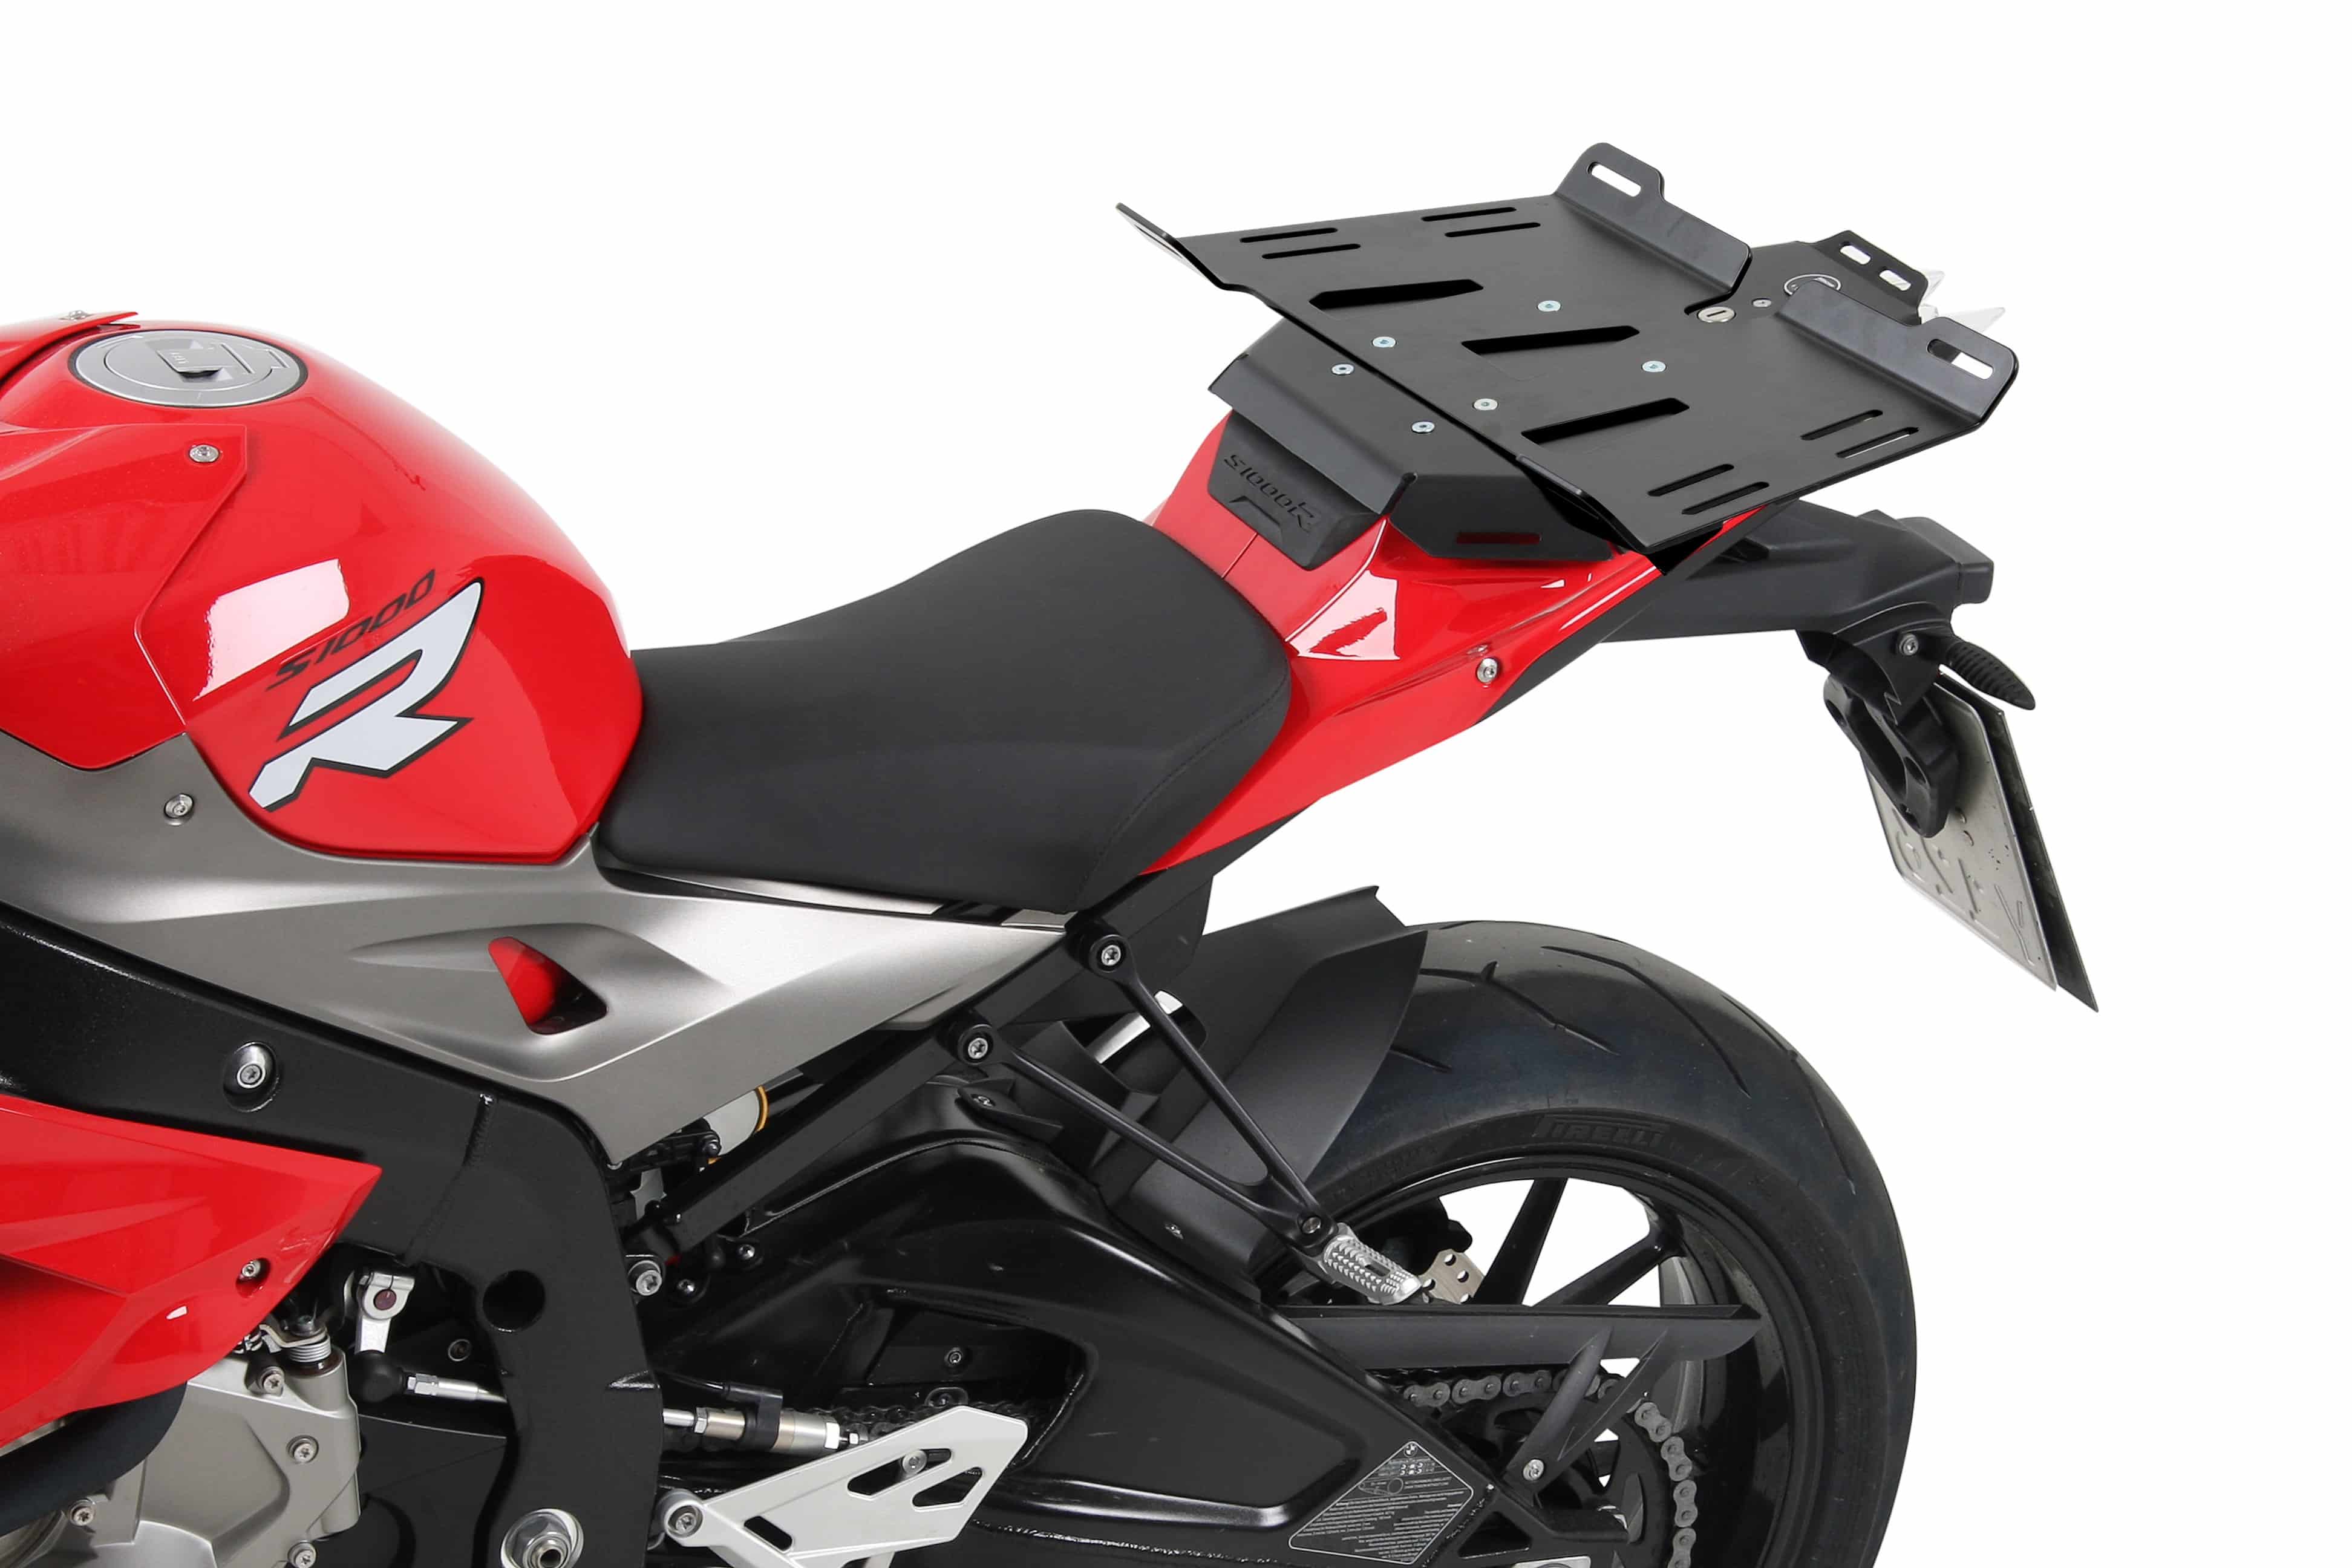 Modelspecific rear enlargement only in combination with Sportrack for BMW S 1000 RR (2016-2018)